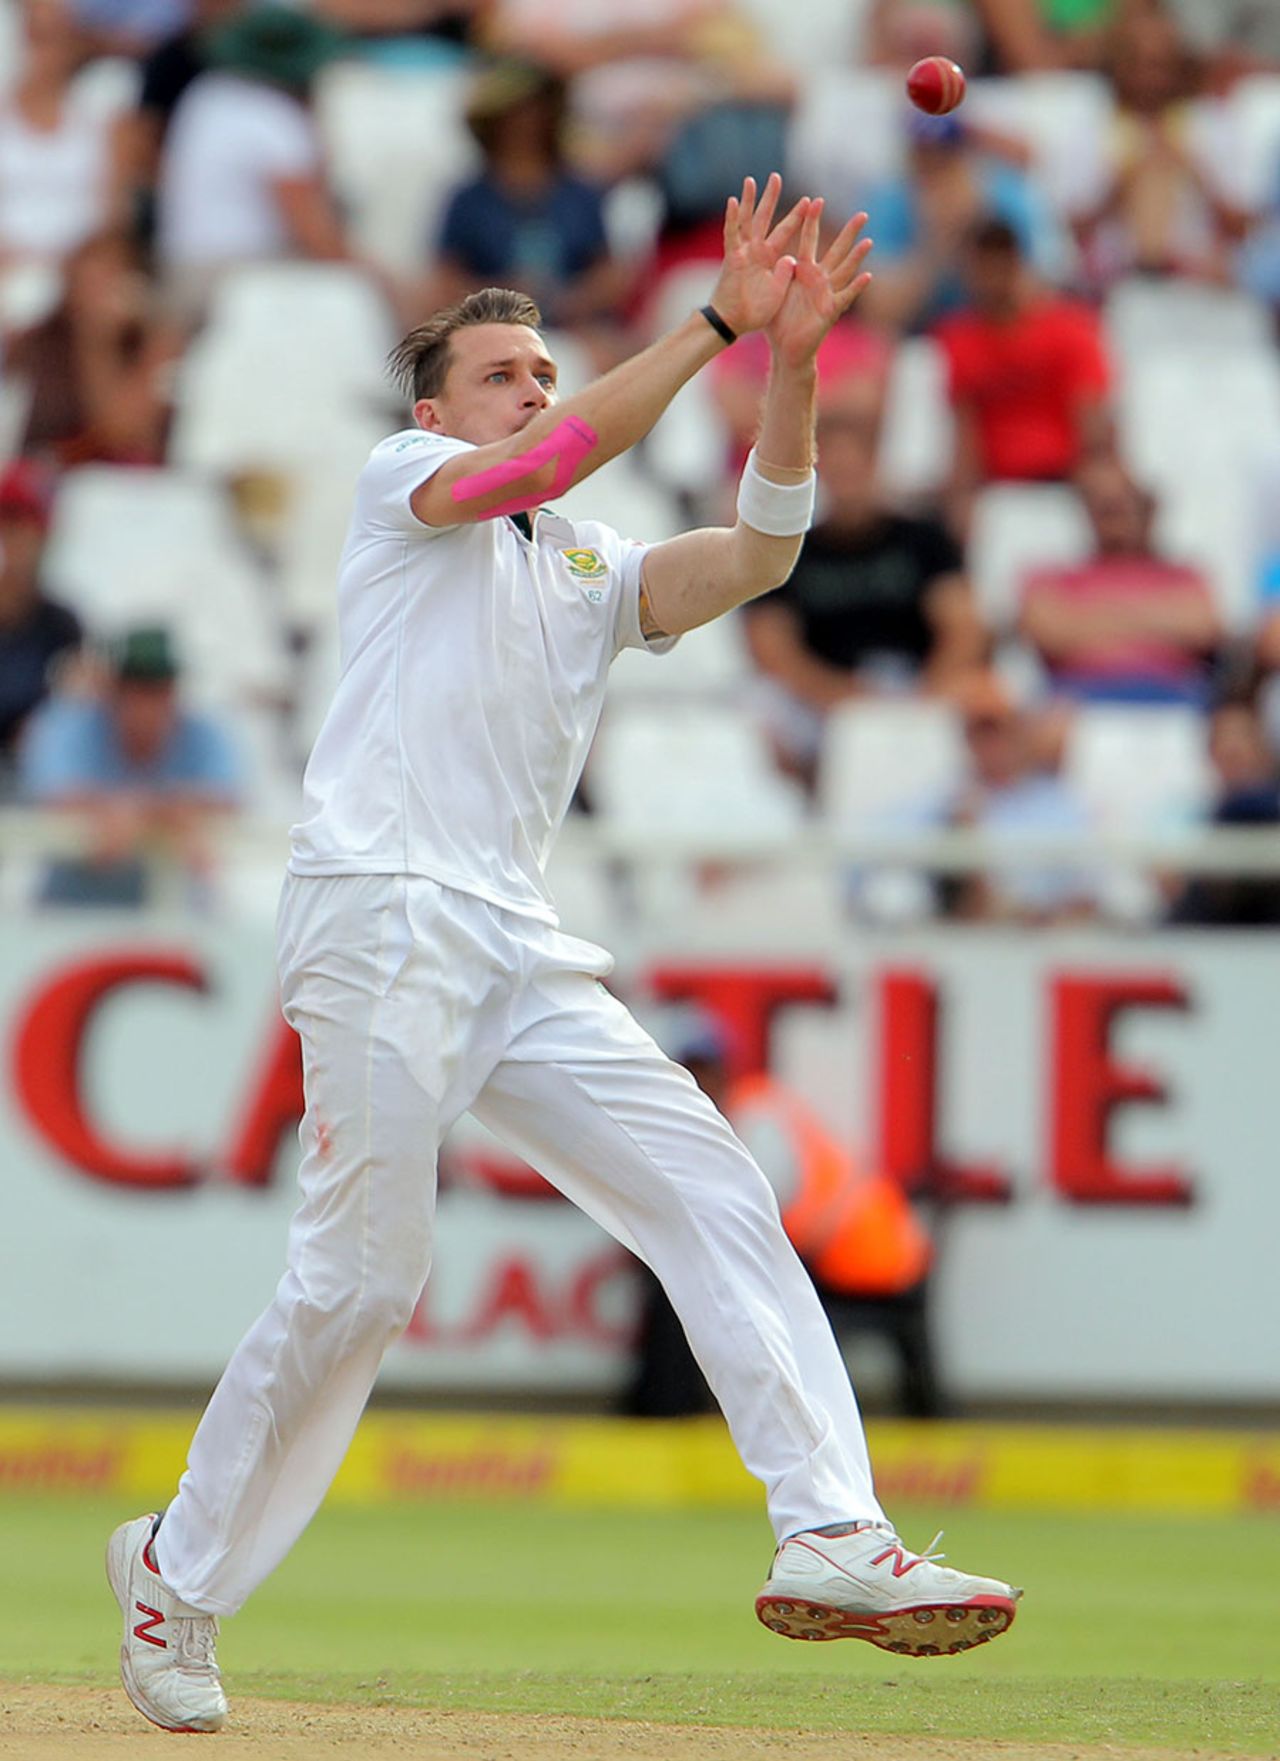 Dale Steyn takes the return catch from Denesh Ramdin, South Africa v West Indies, 3rd Test, Cape Town, 1st day, January 2, 2015